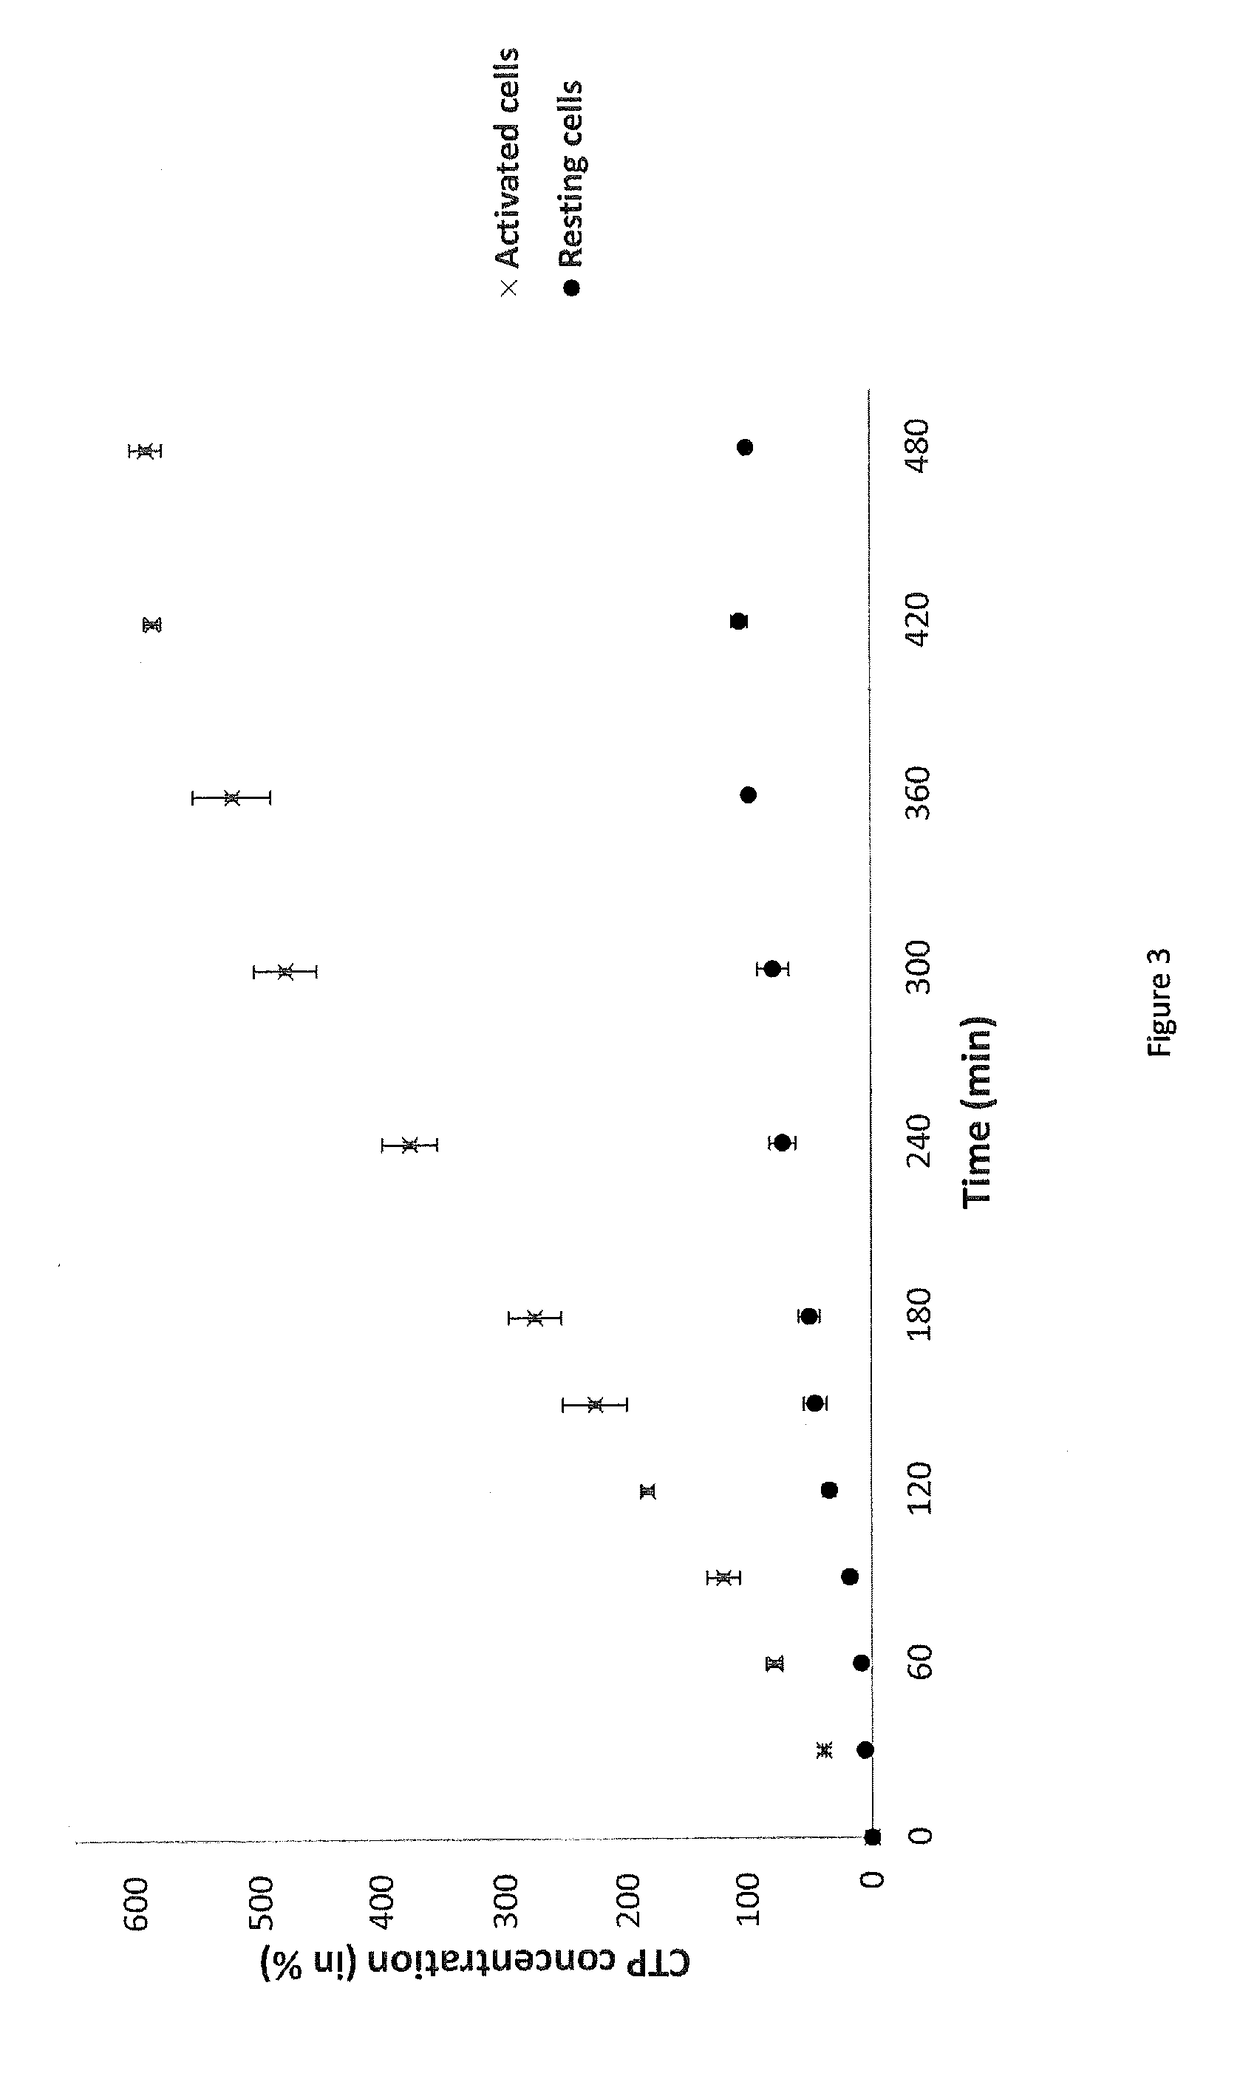 Methods For Detecting Or Quantifying CTP And CTP Synthase Activity